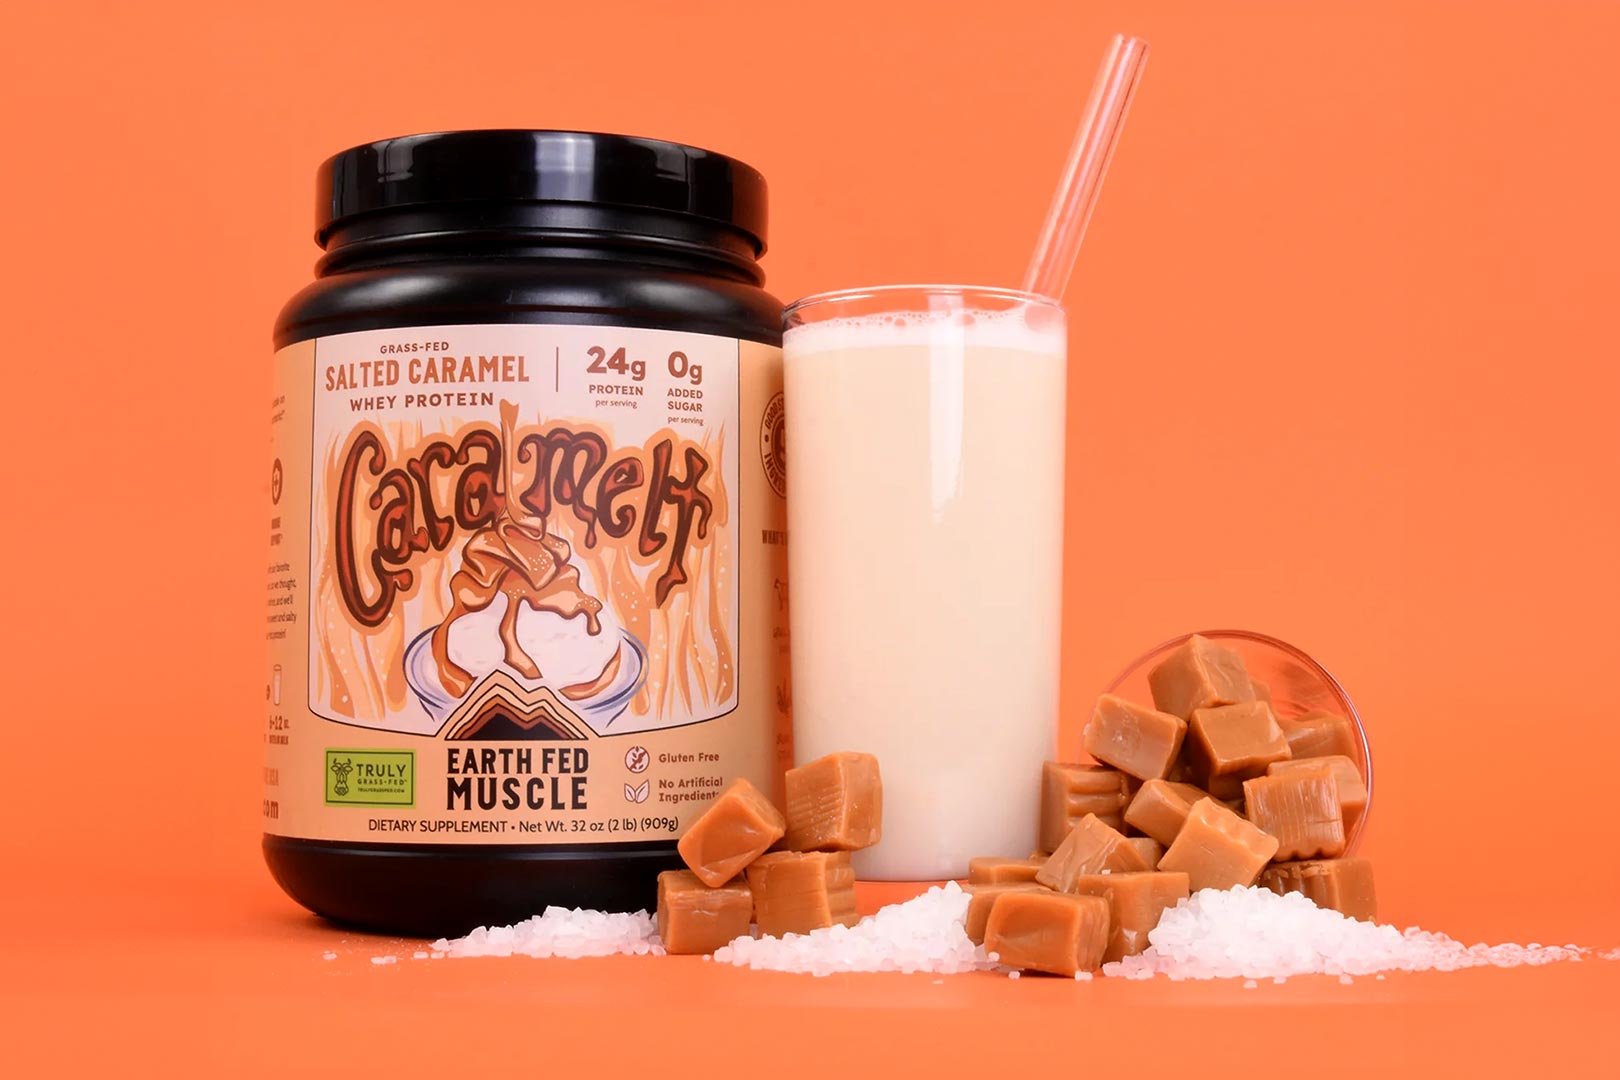 Earth Fed Muscle Caramel Grass Fed Whey Protein